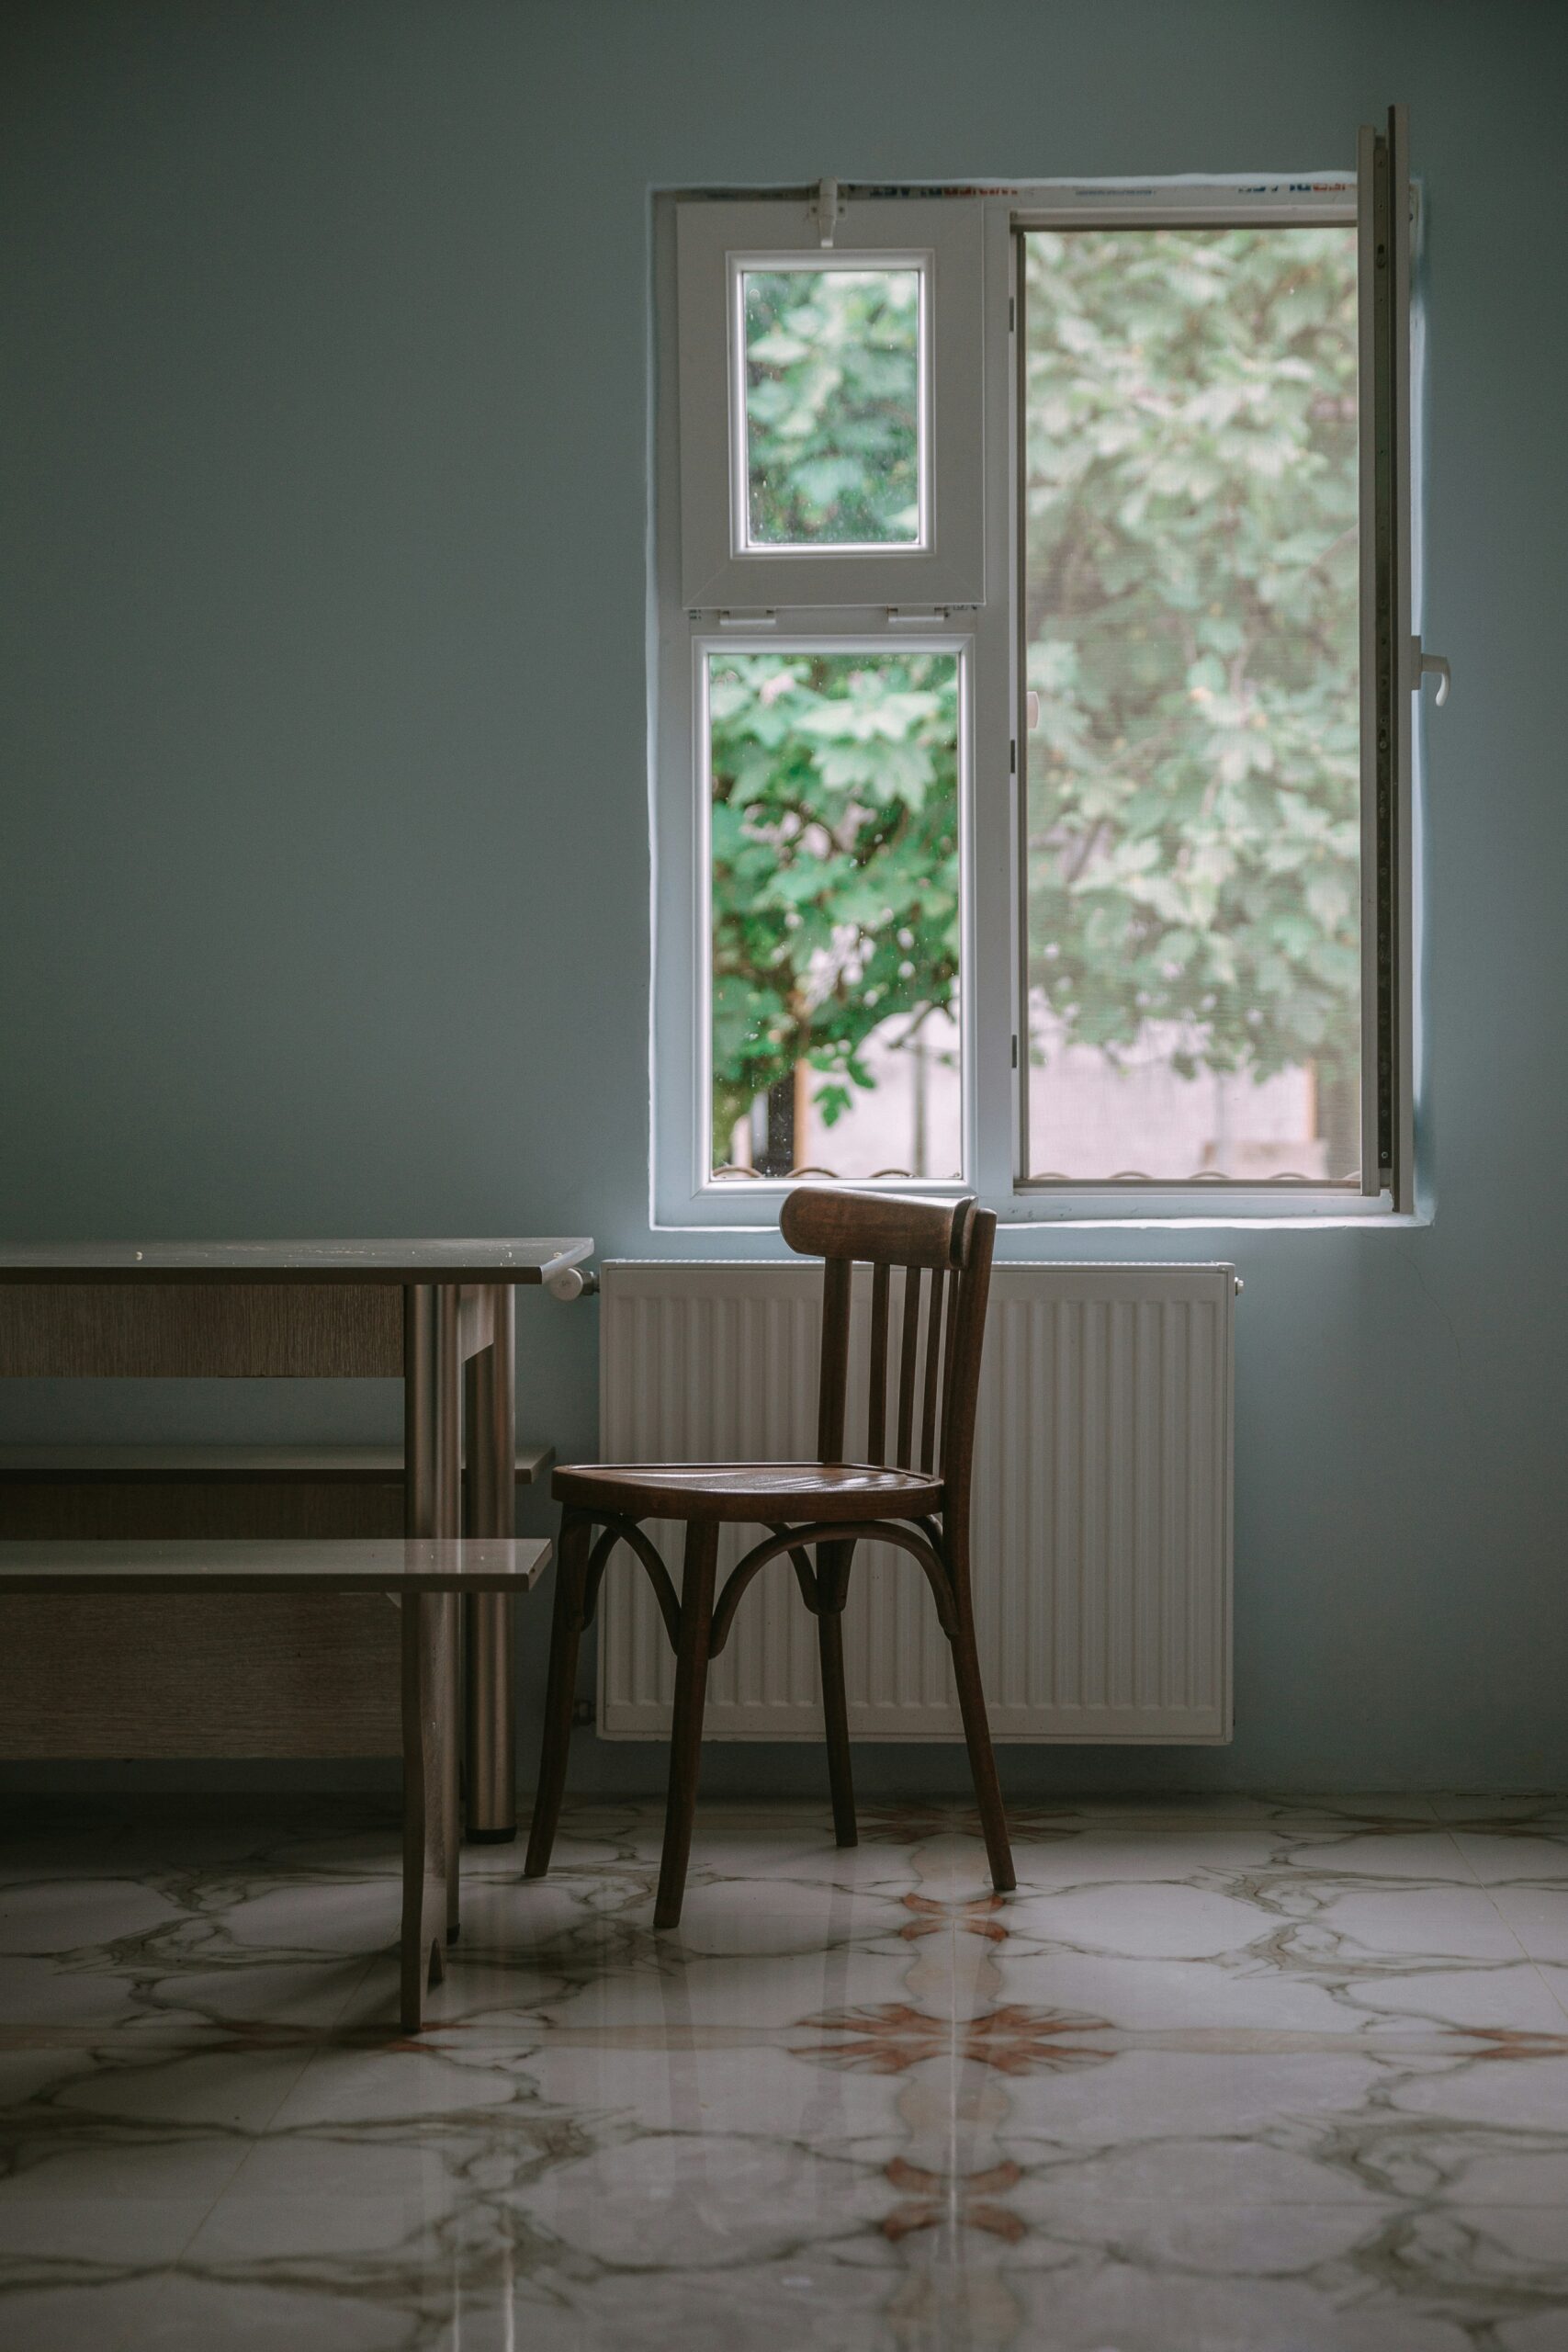 Image of a table and chair next to a window.